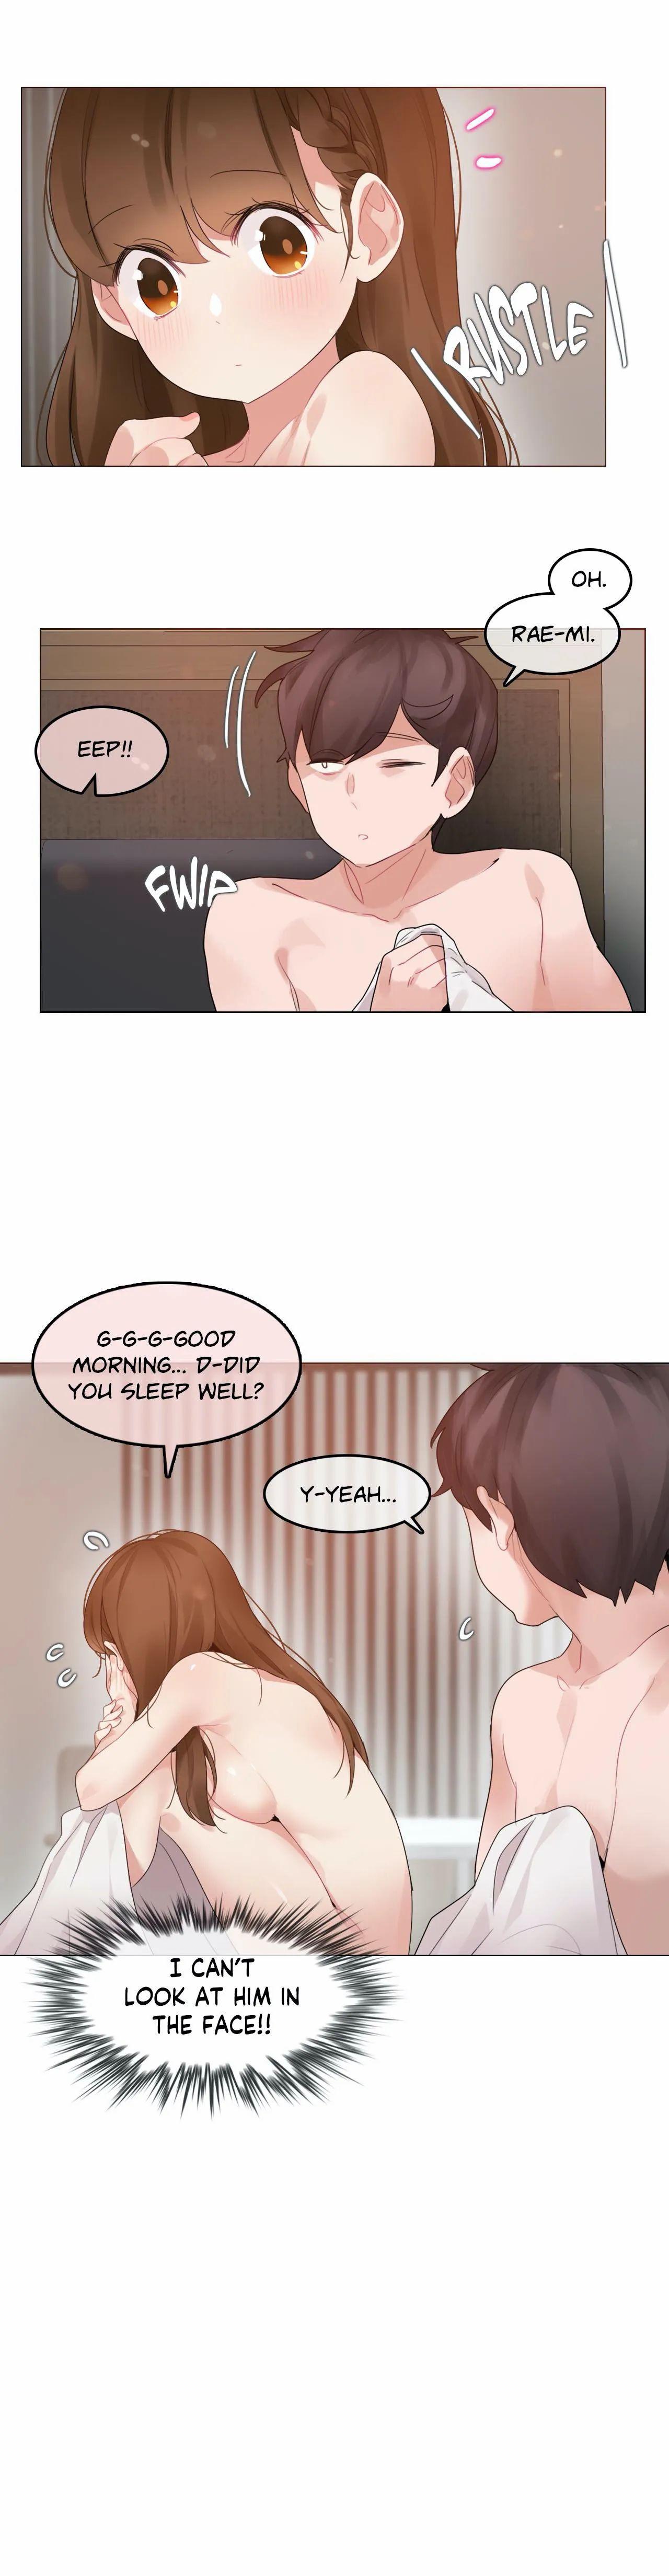 Perverts' Daily Lives Episode 1: Her Secret Recipe Ch1-19 193